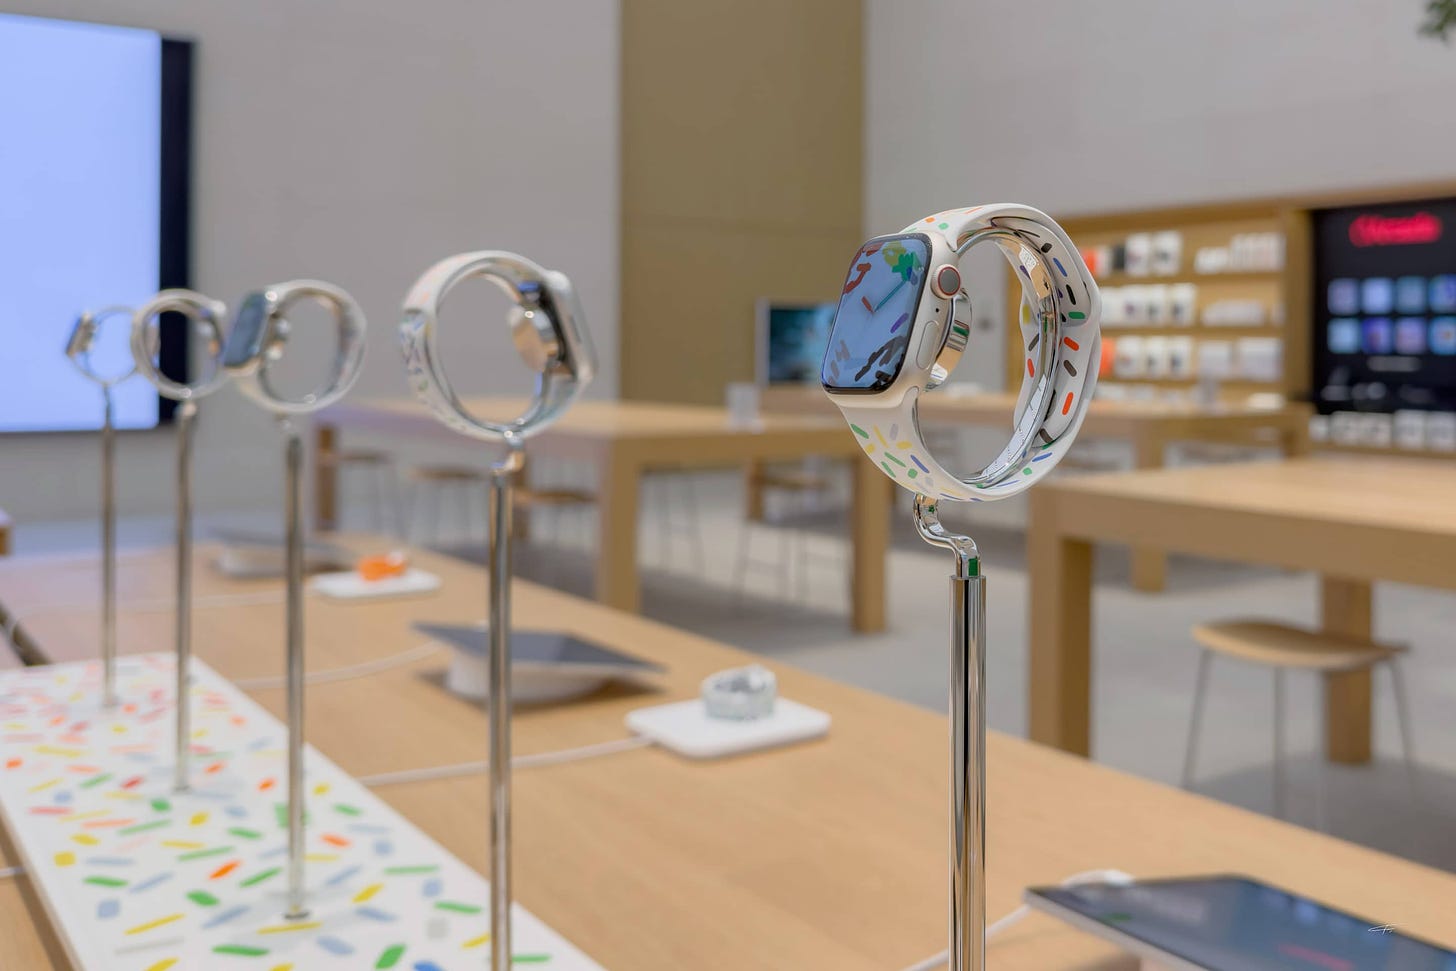 The Apple Watch Pride riser. A series of Apple Watches are mounted on polished pedestals.